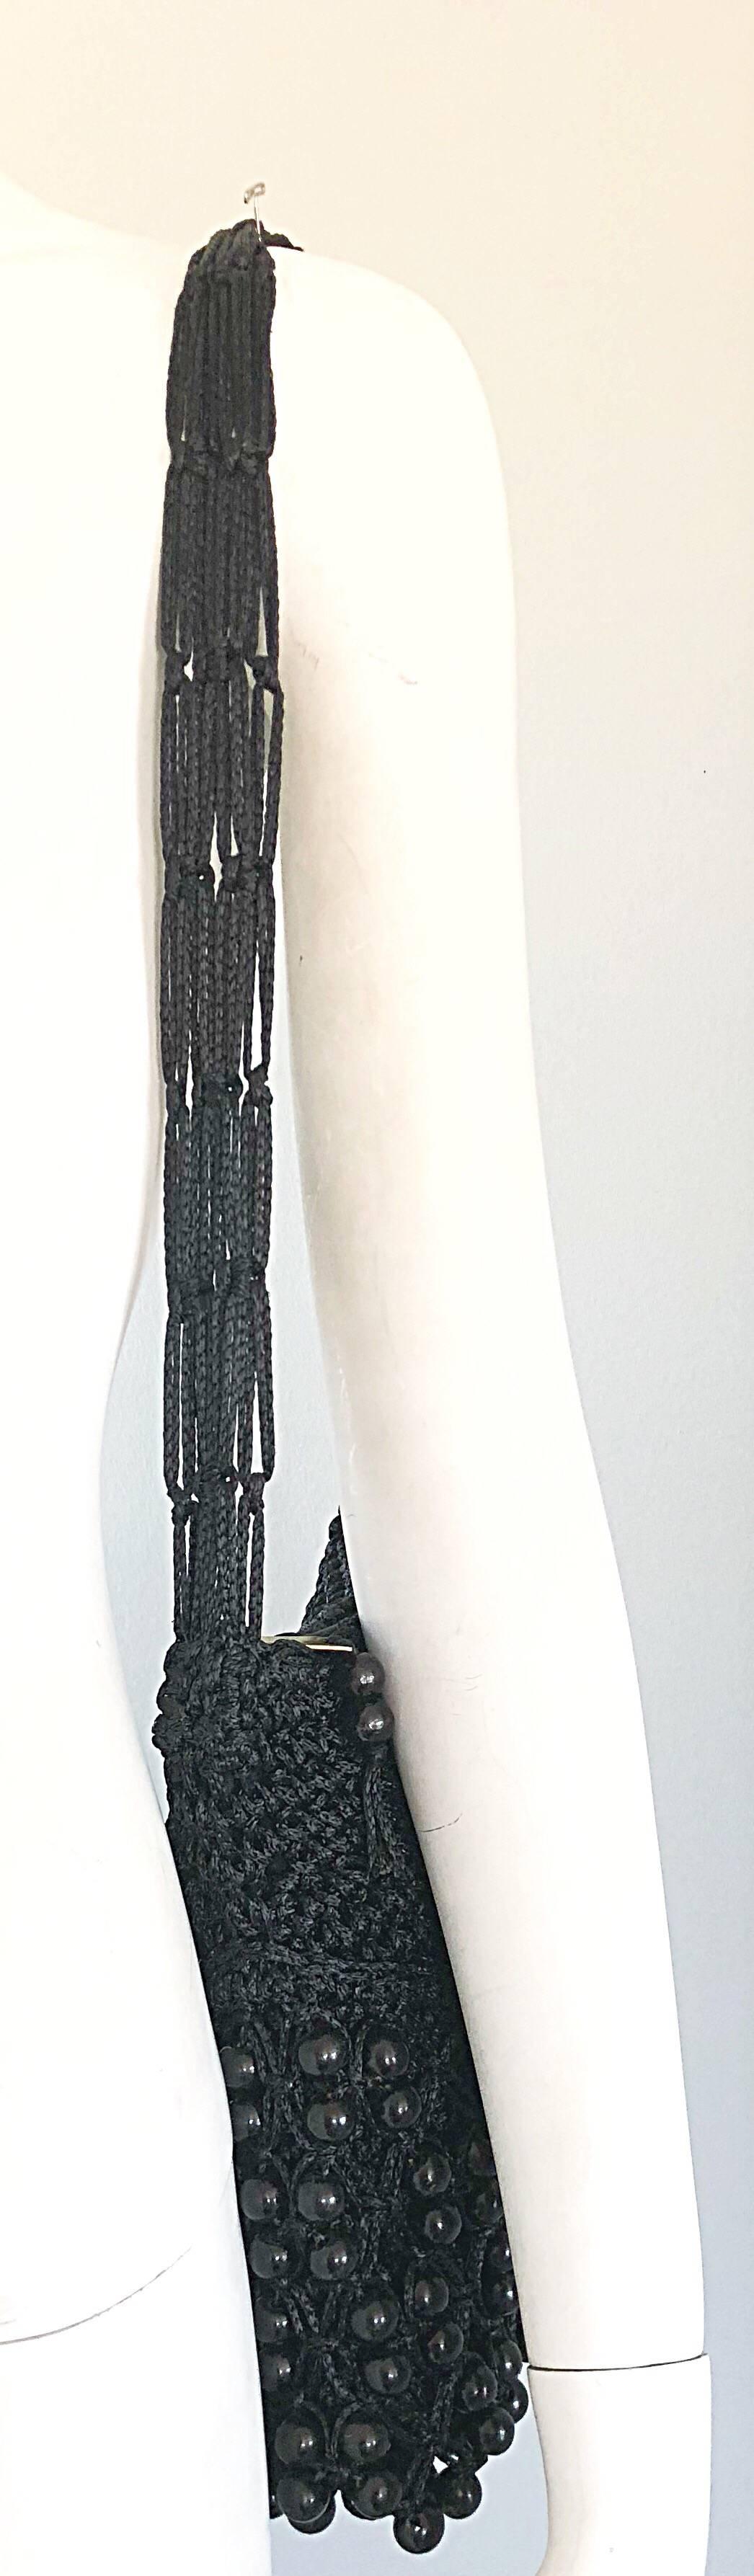 Fantastic vintage WALBORG black crochet knit beaded shoulder bag! Features a multi-strand shoulder strap that fits comfortably on the shoulder. Uniquely, this bag features the same black lacquer beading on both the front and back of the purse. The